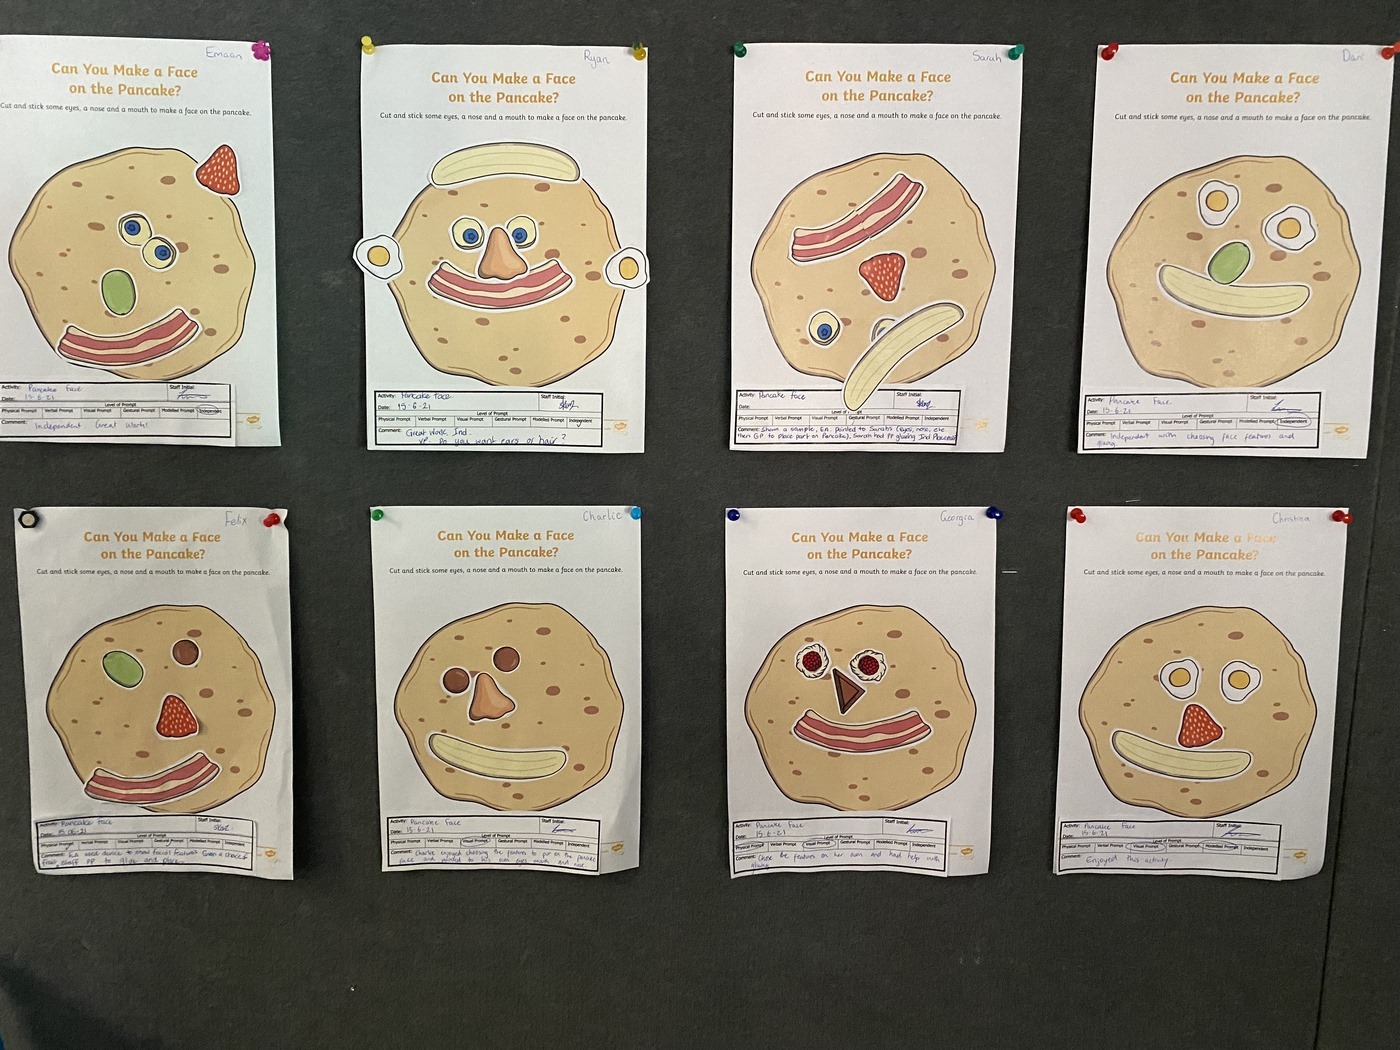 We made faces on the Pancakes. (Copy)